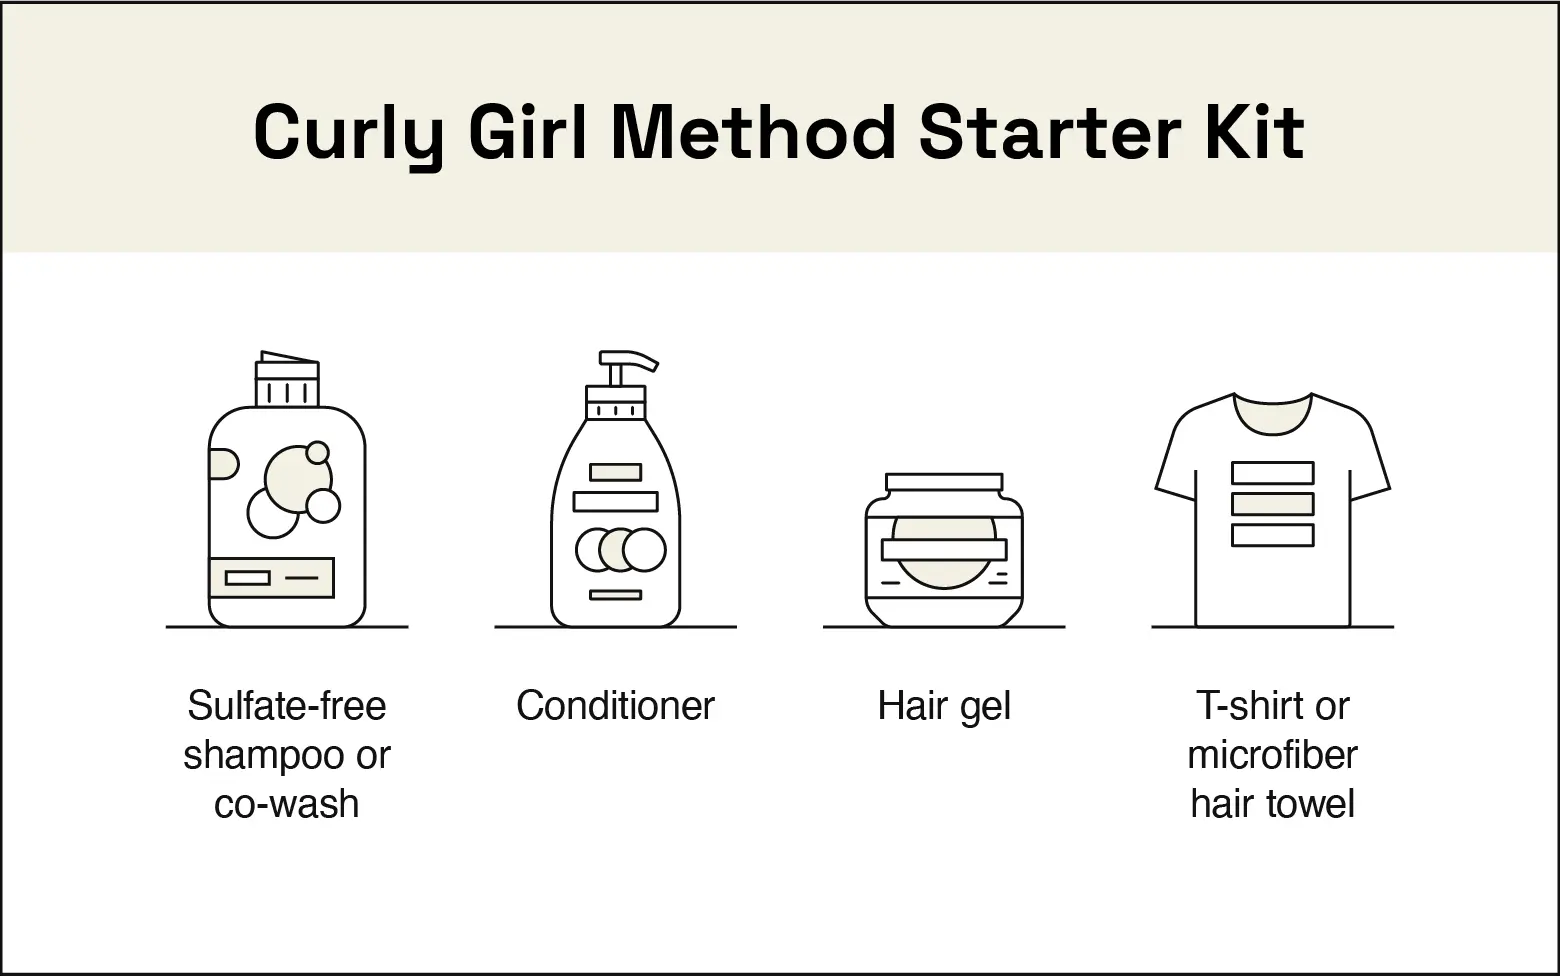 To try the curly girl method, you need sulfate-free shampoo or co-wash, conditioner, hair gel, and a T-shirt or microfiber hair towel.